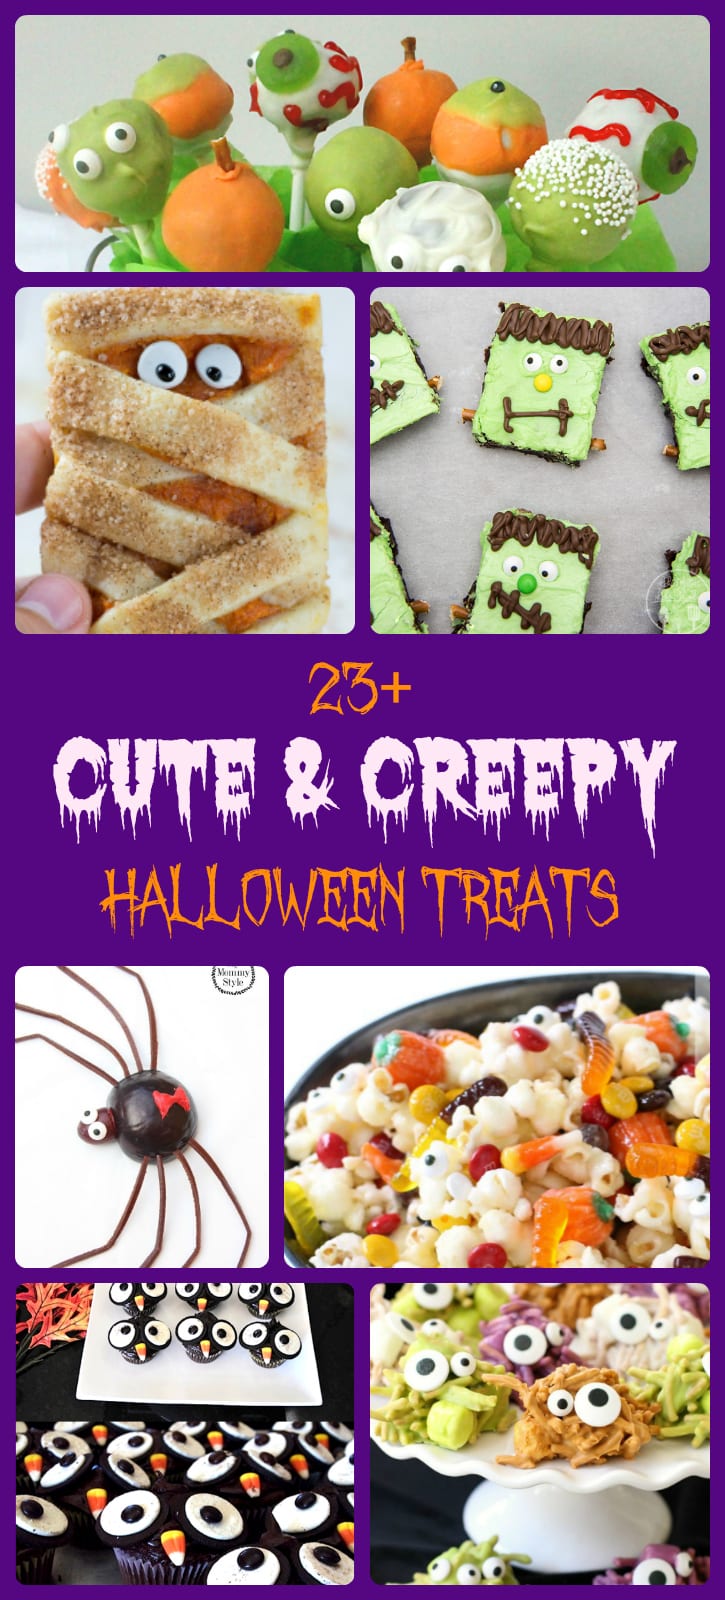 Halloween treats perfect for parties! Cute, creepy, spooky and DELICIOUS! Here are 23+ Halloween Treats you need to make this fall! Fun #Halloween #recipes from Butter With A Side of Bread